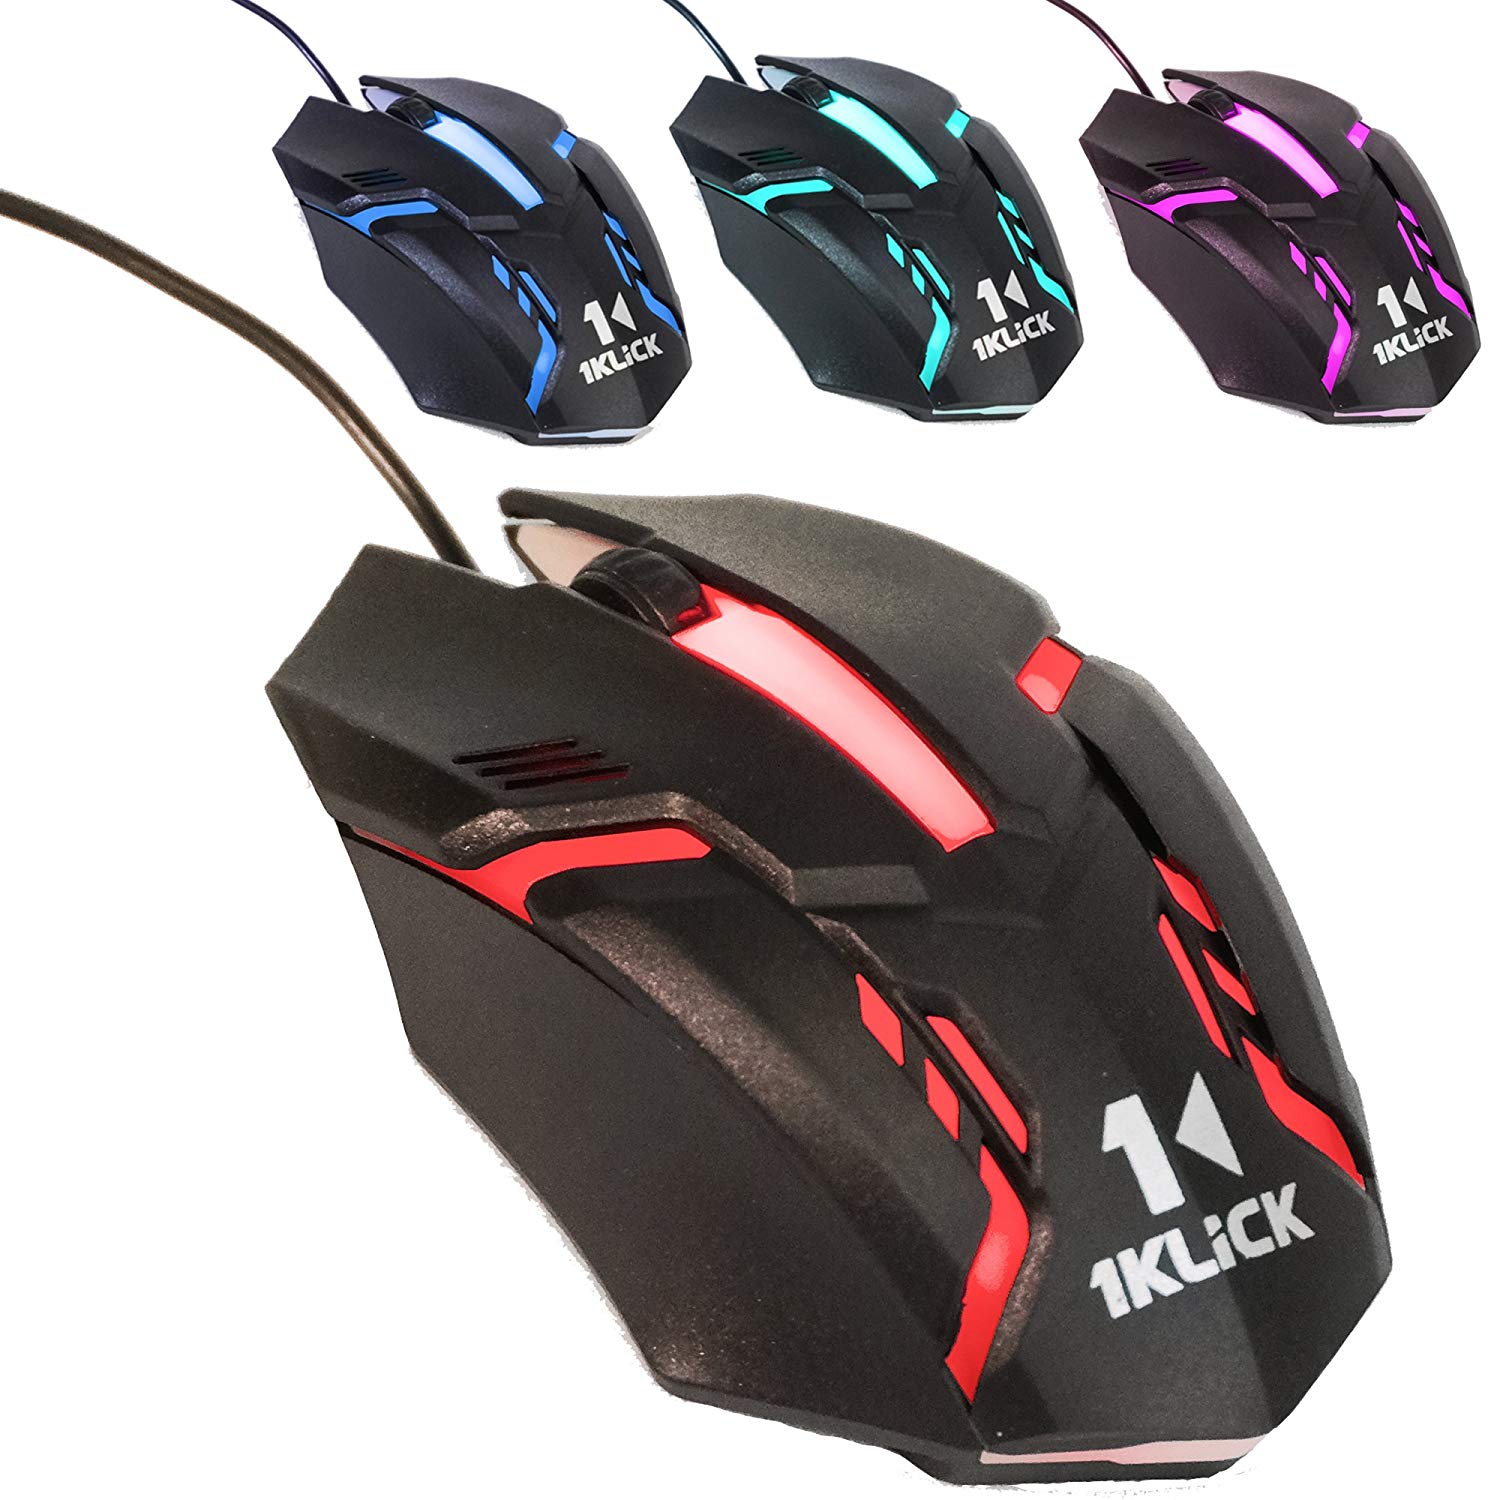 the best gaming mouse of 2018